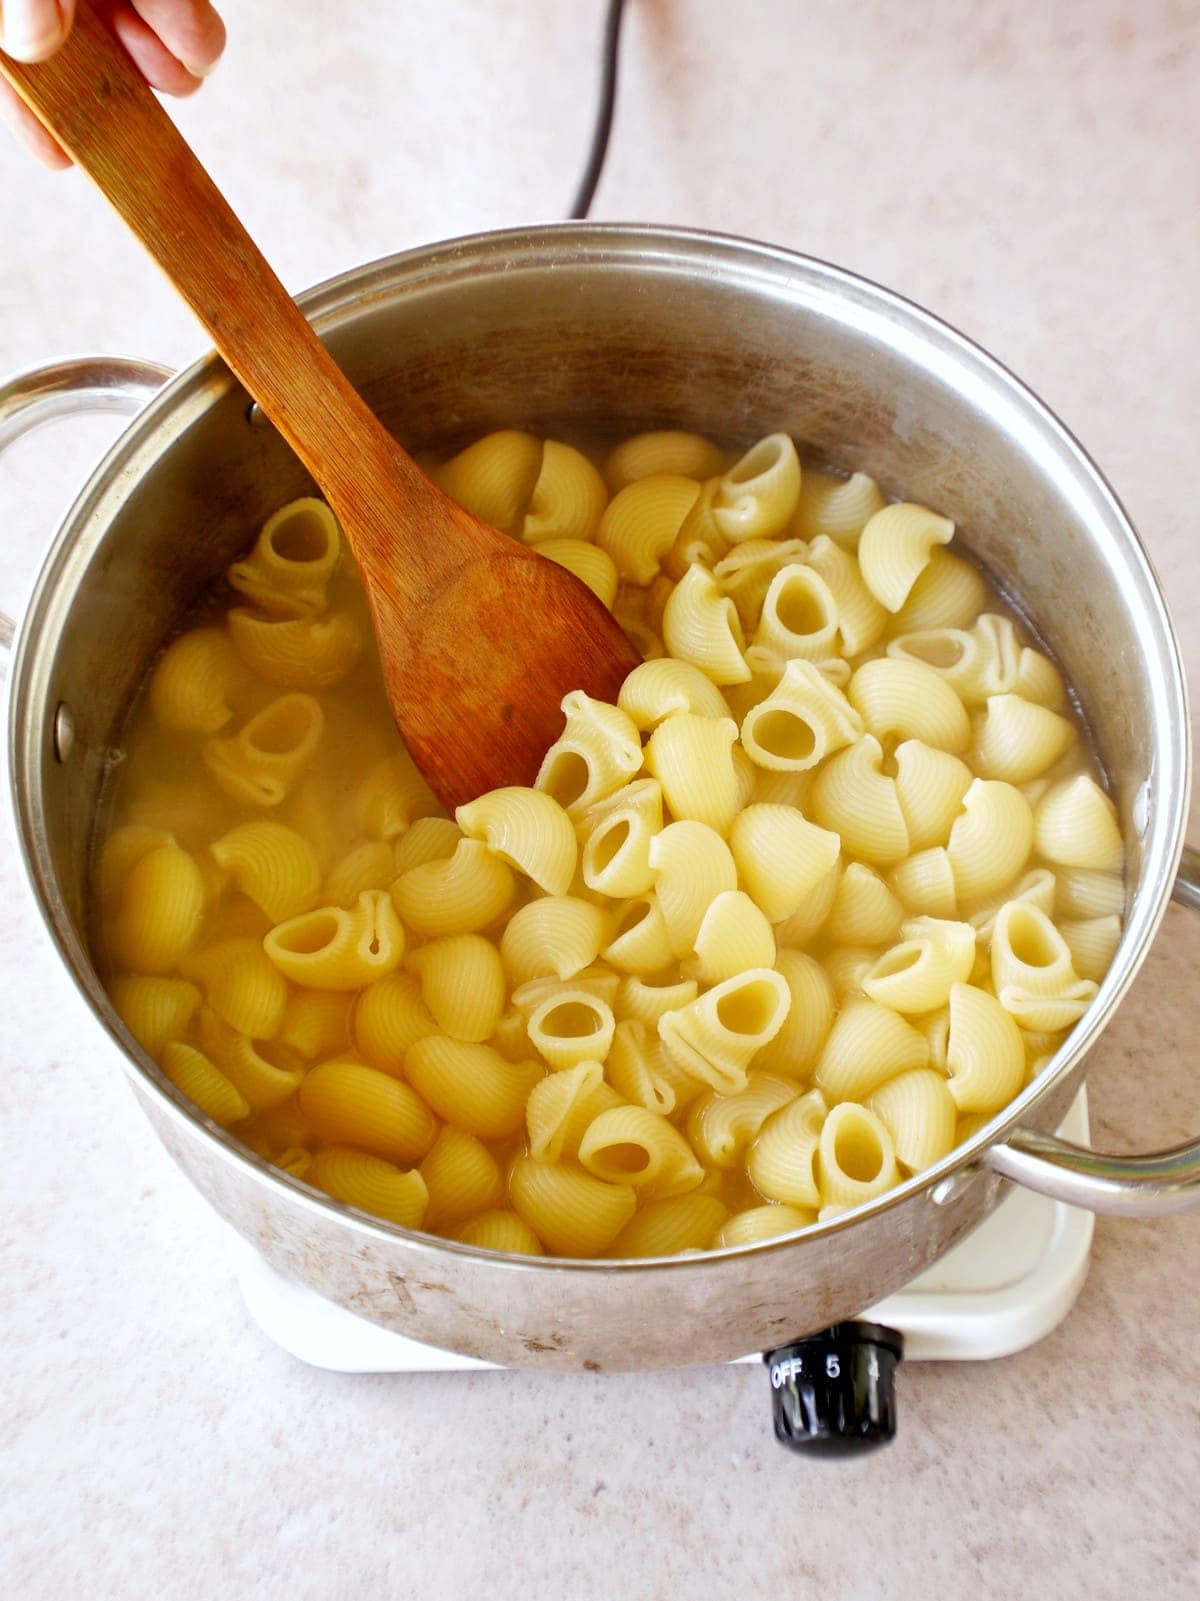 Cooking pasta in pot with wooden spoon